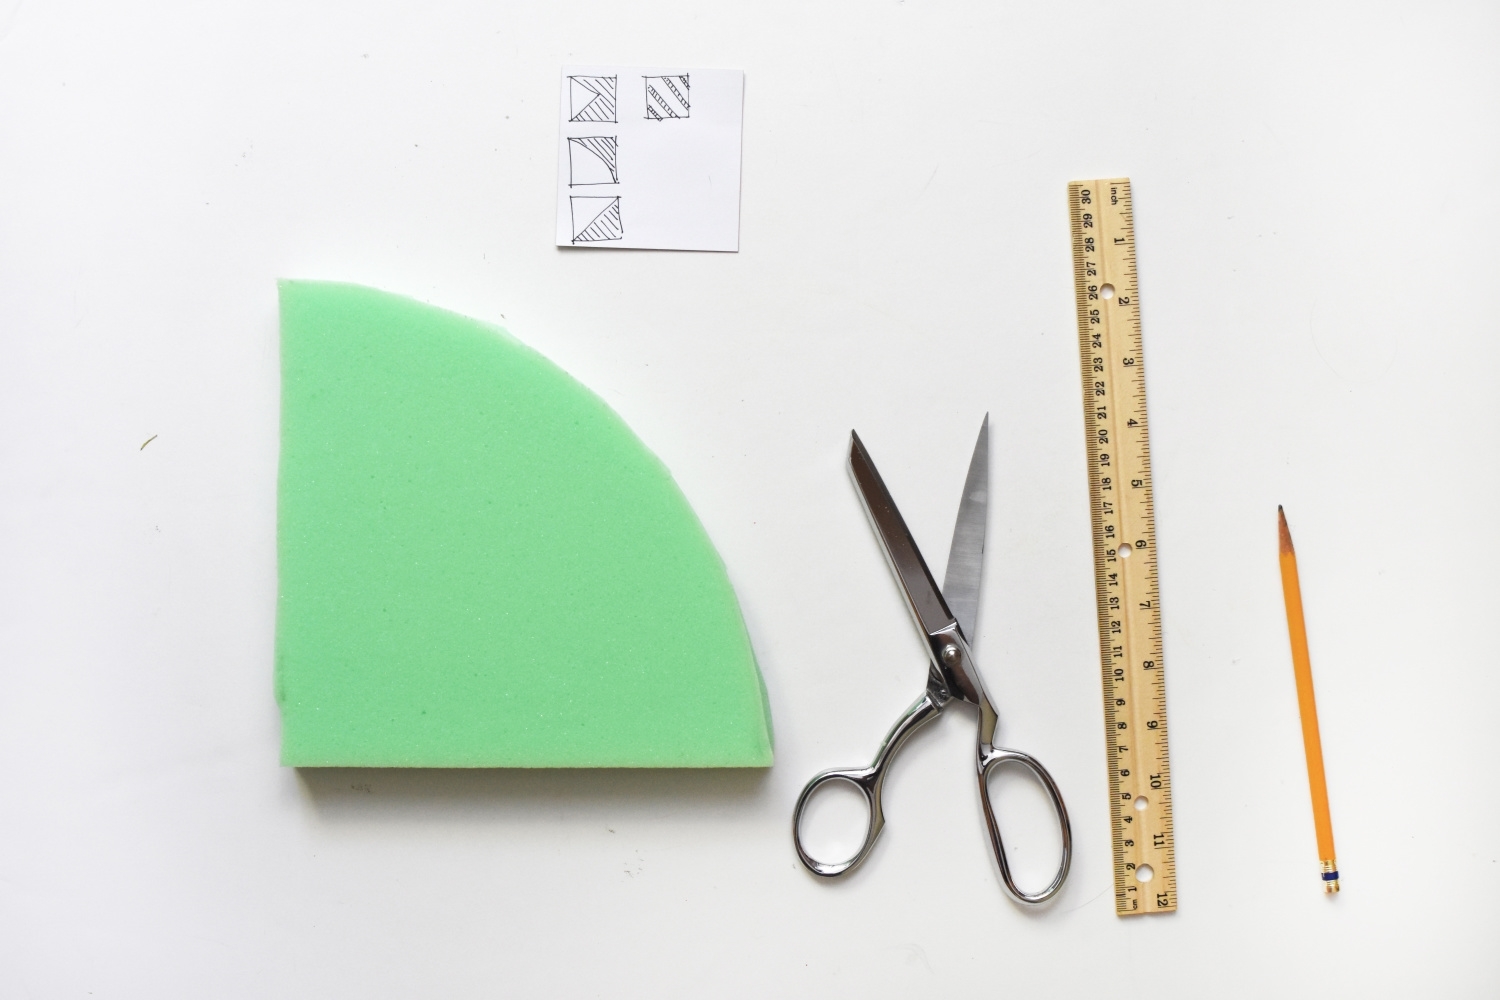 Cut your desired patterns onto the foam tiles.